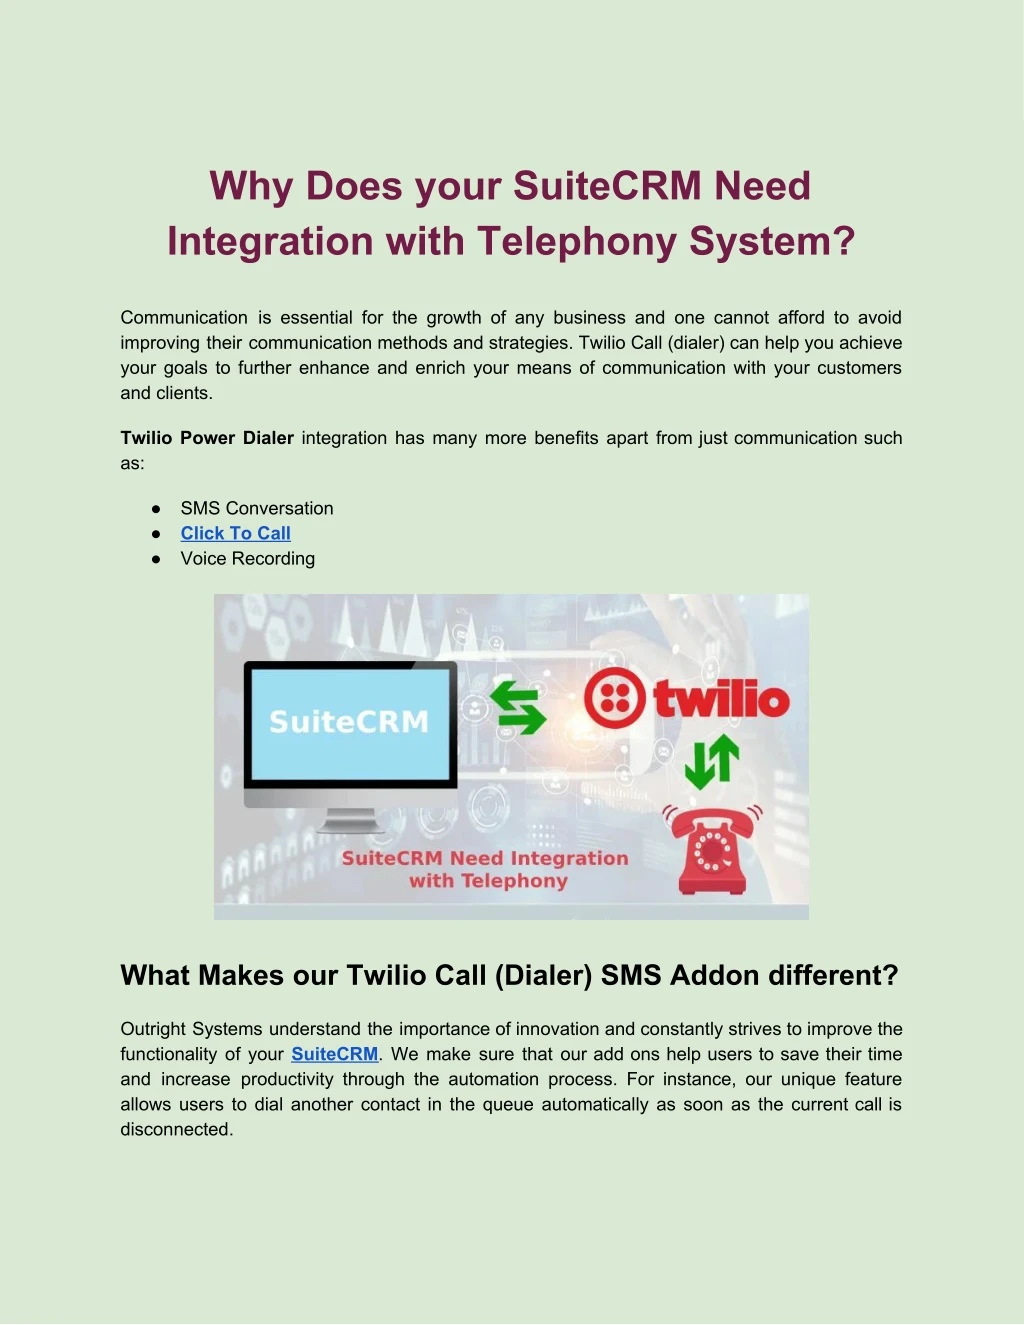 why does your suitecrm need integration with